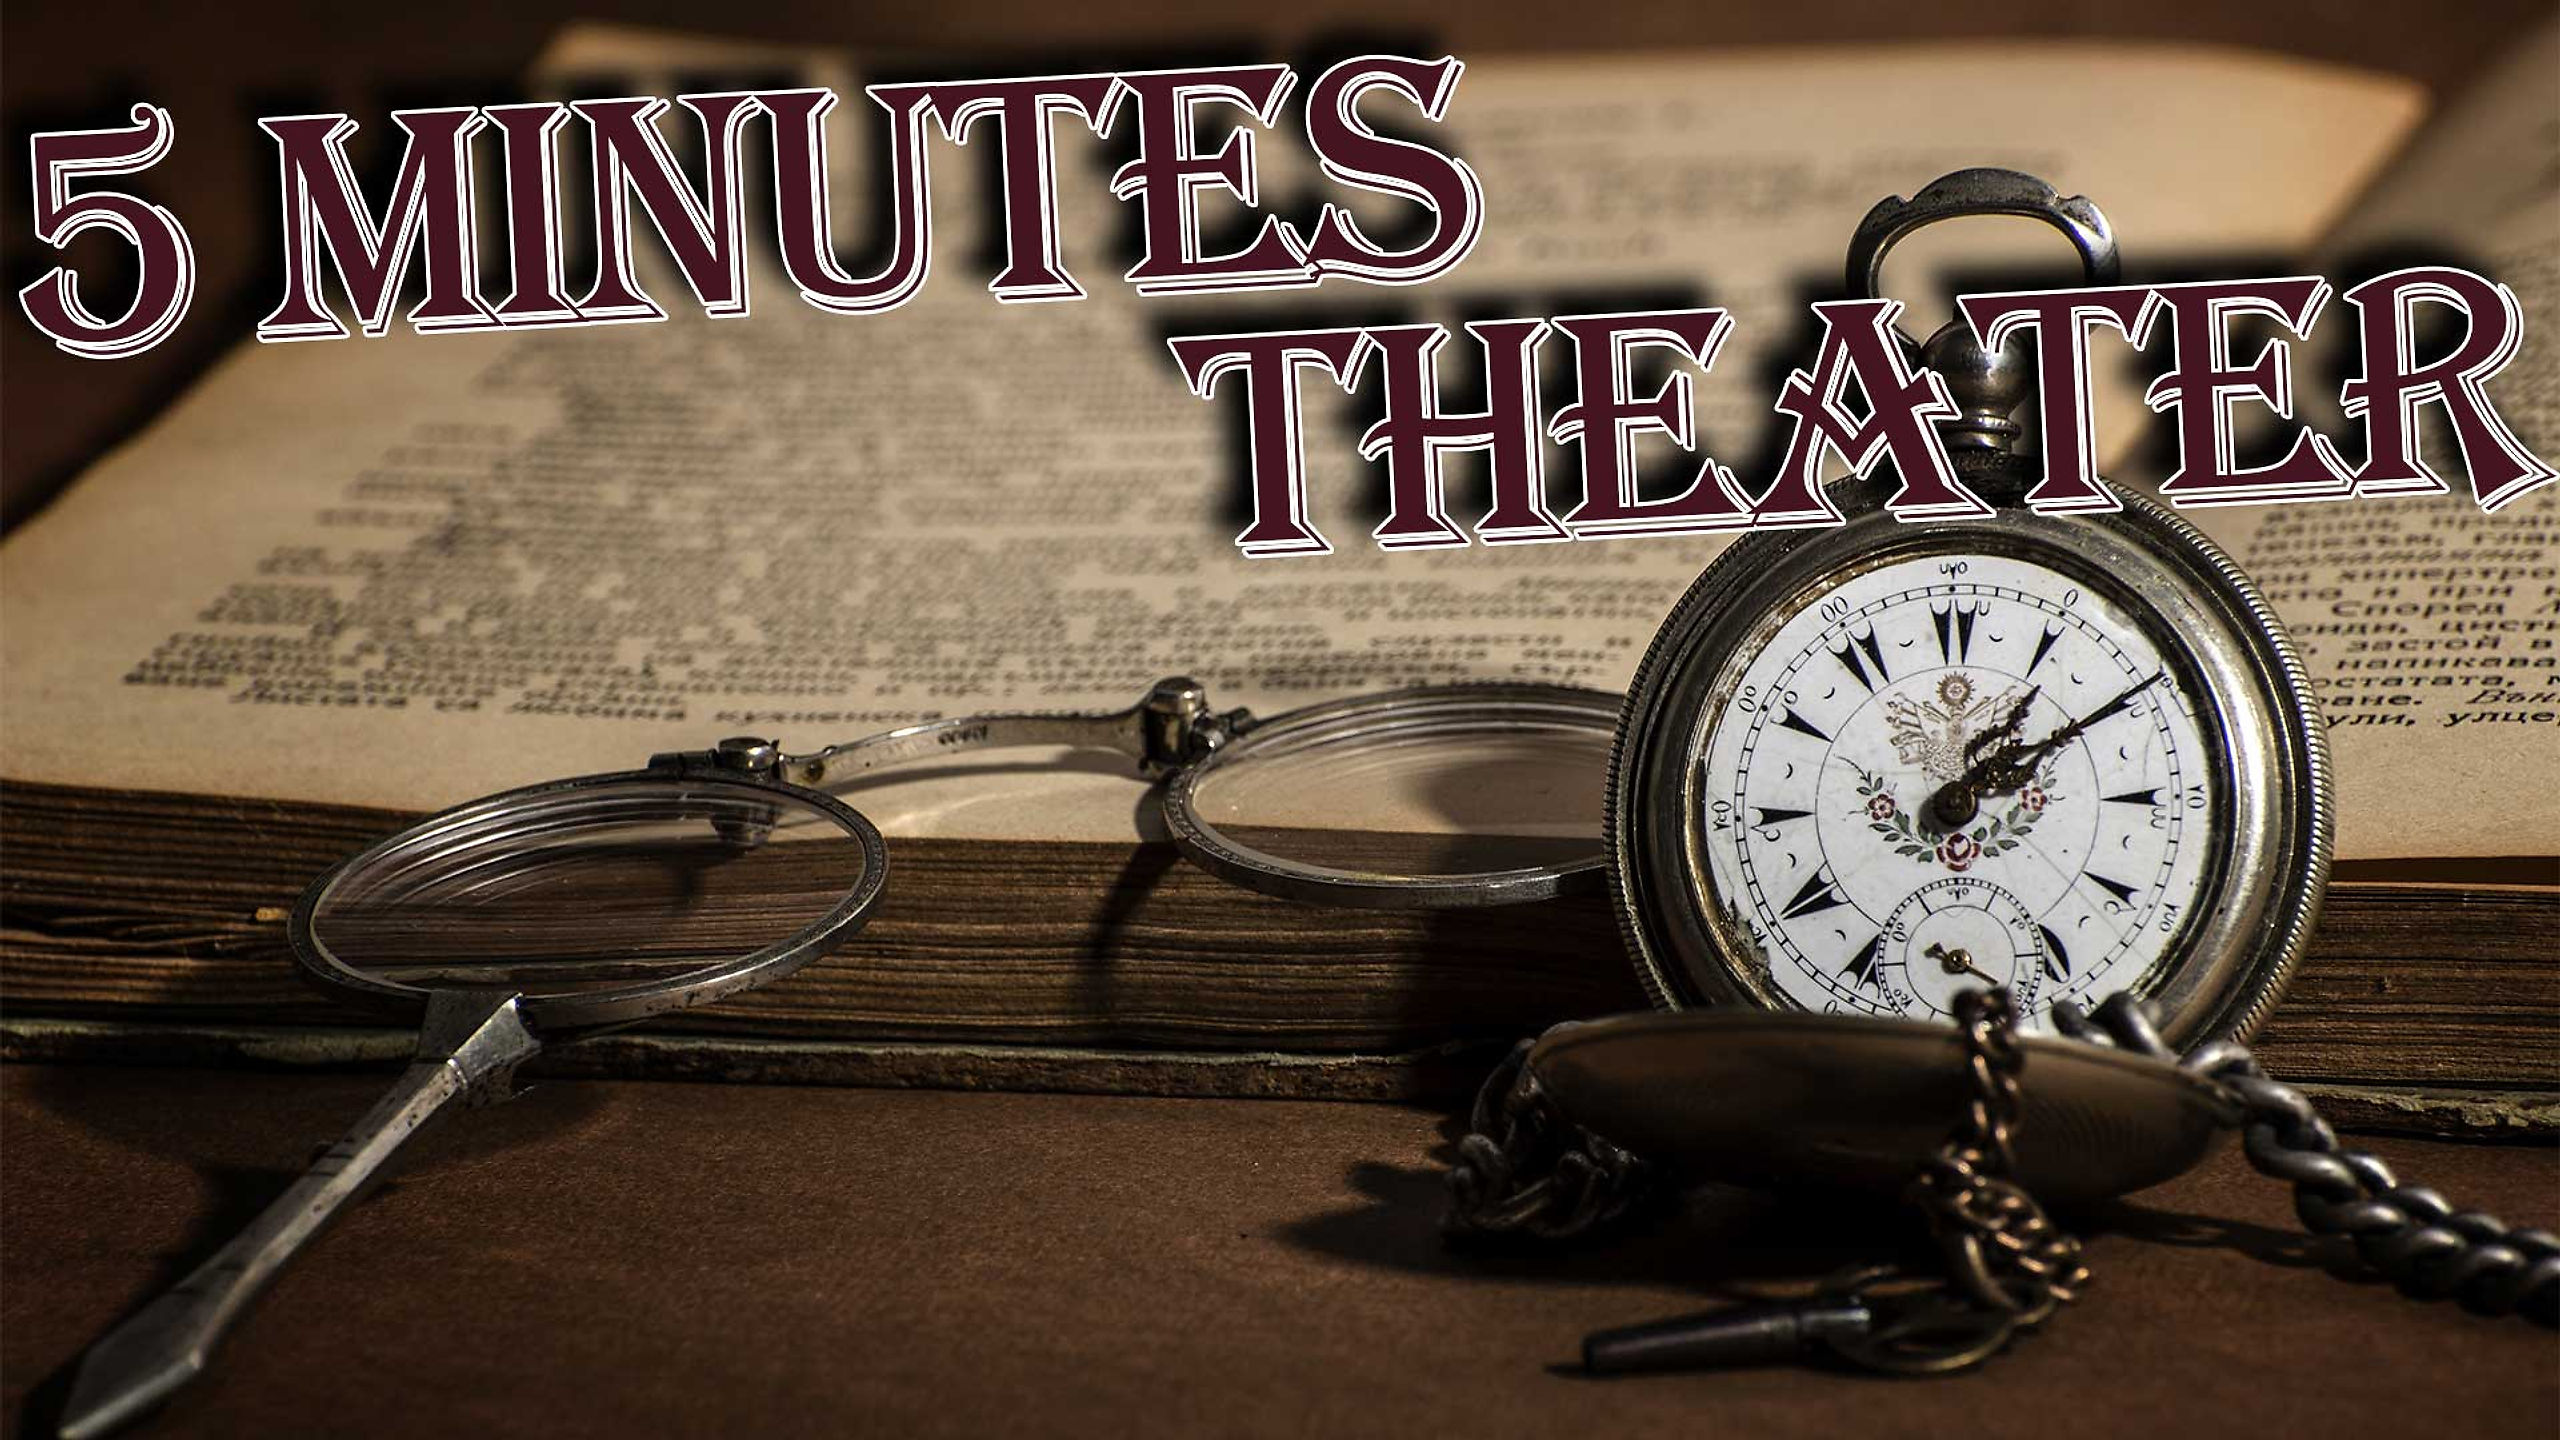 5 minutes theater